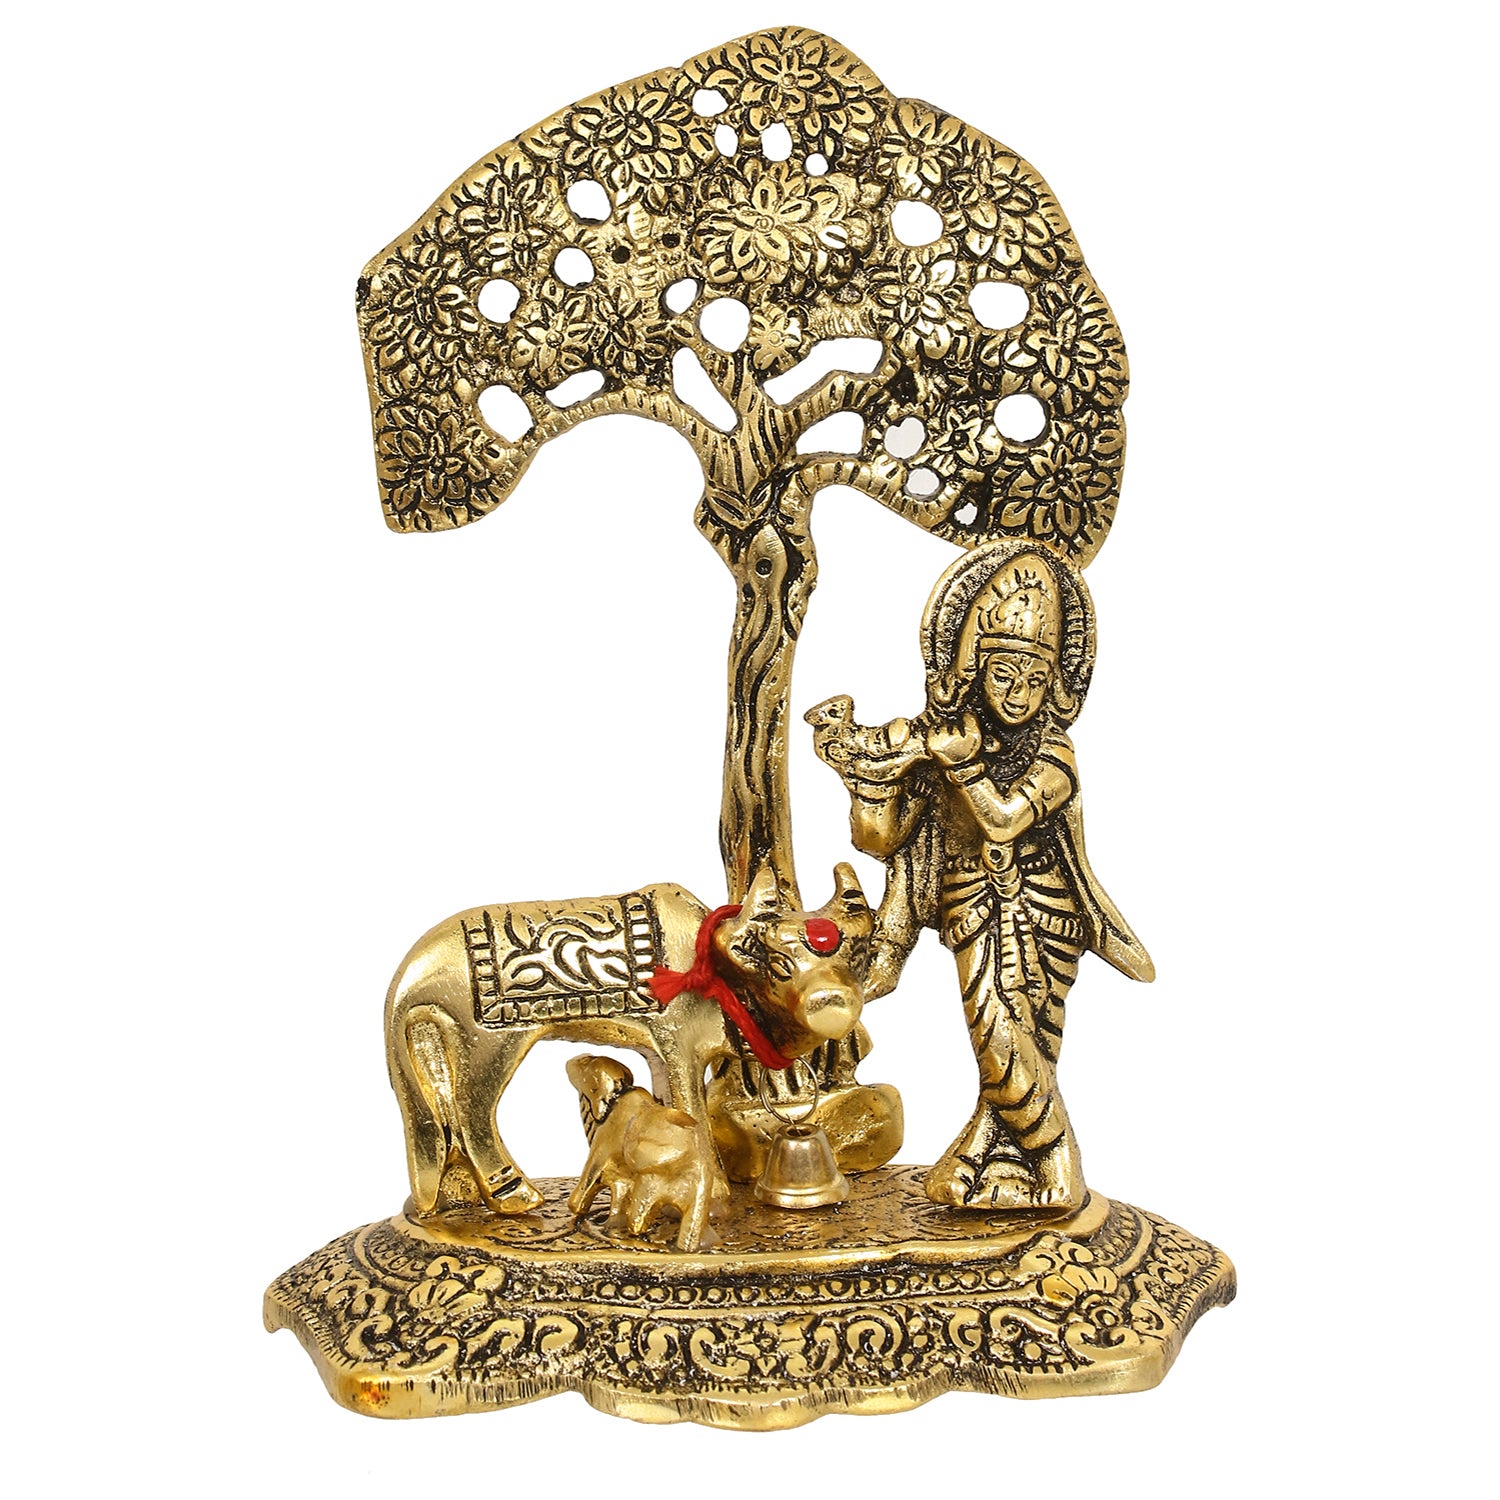 Golden Lord Krishna Idol playing Flute under Tree with Cow and Calf 2